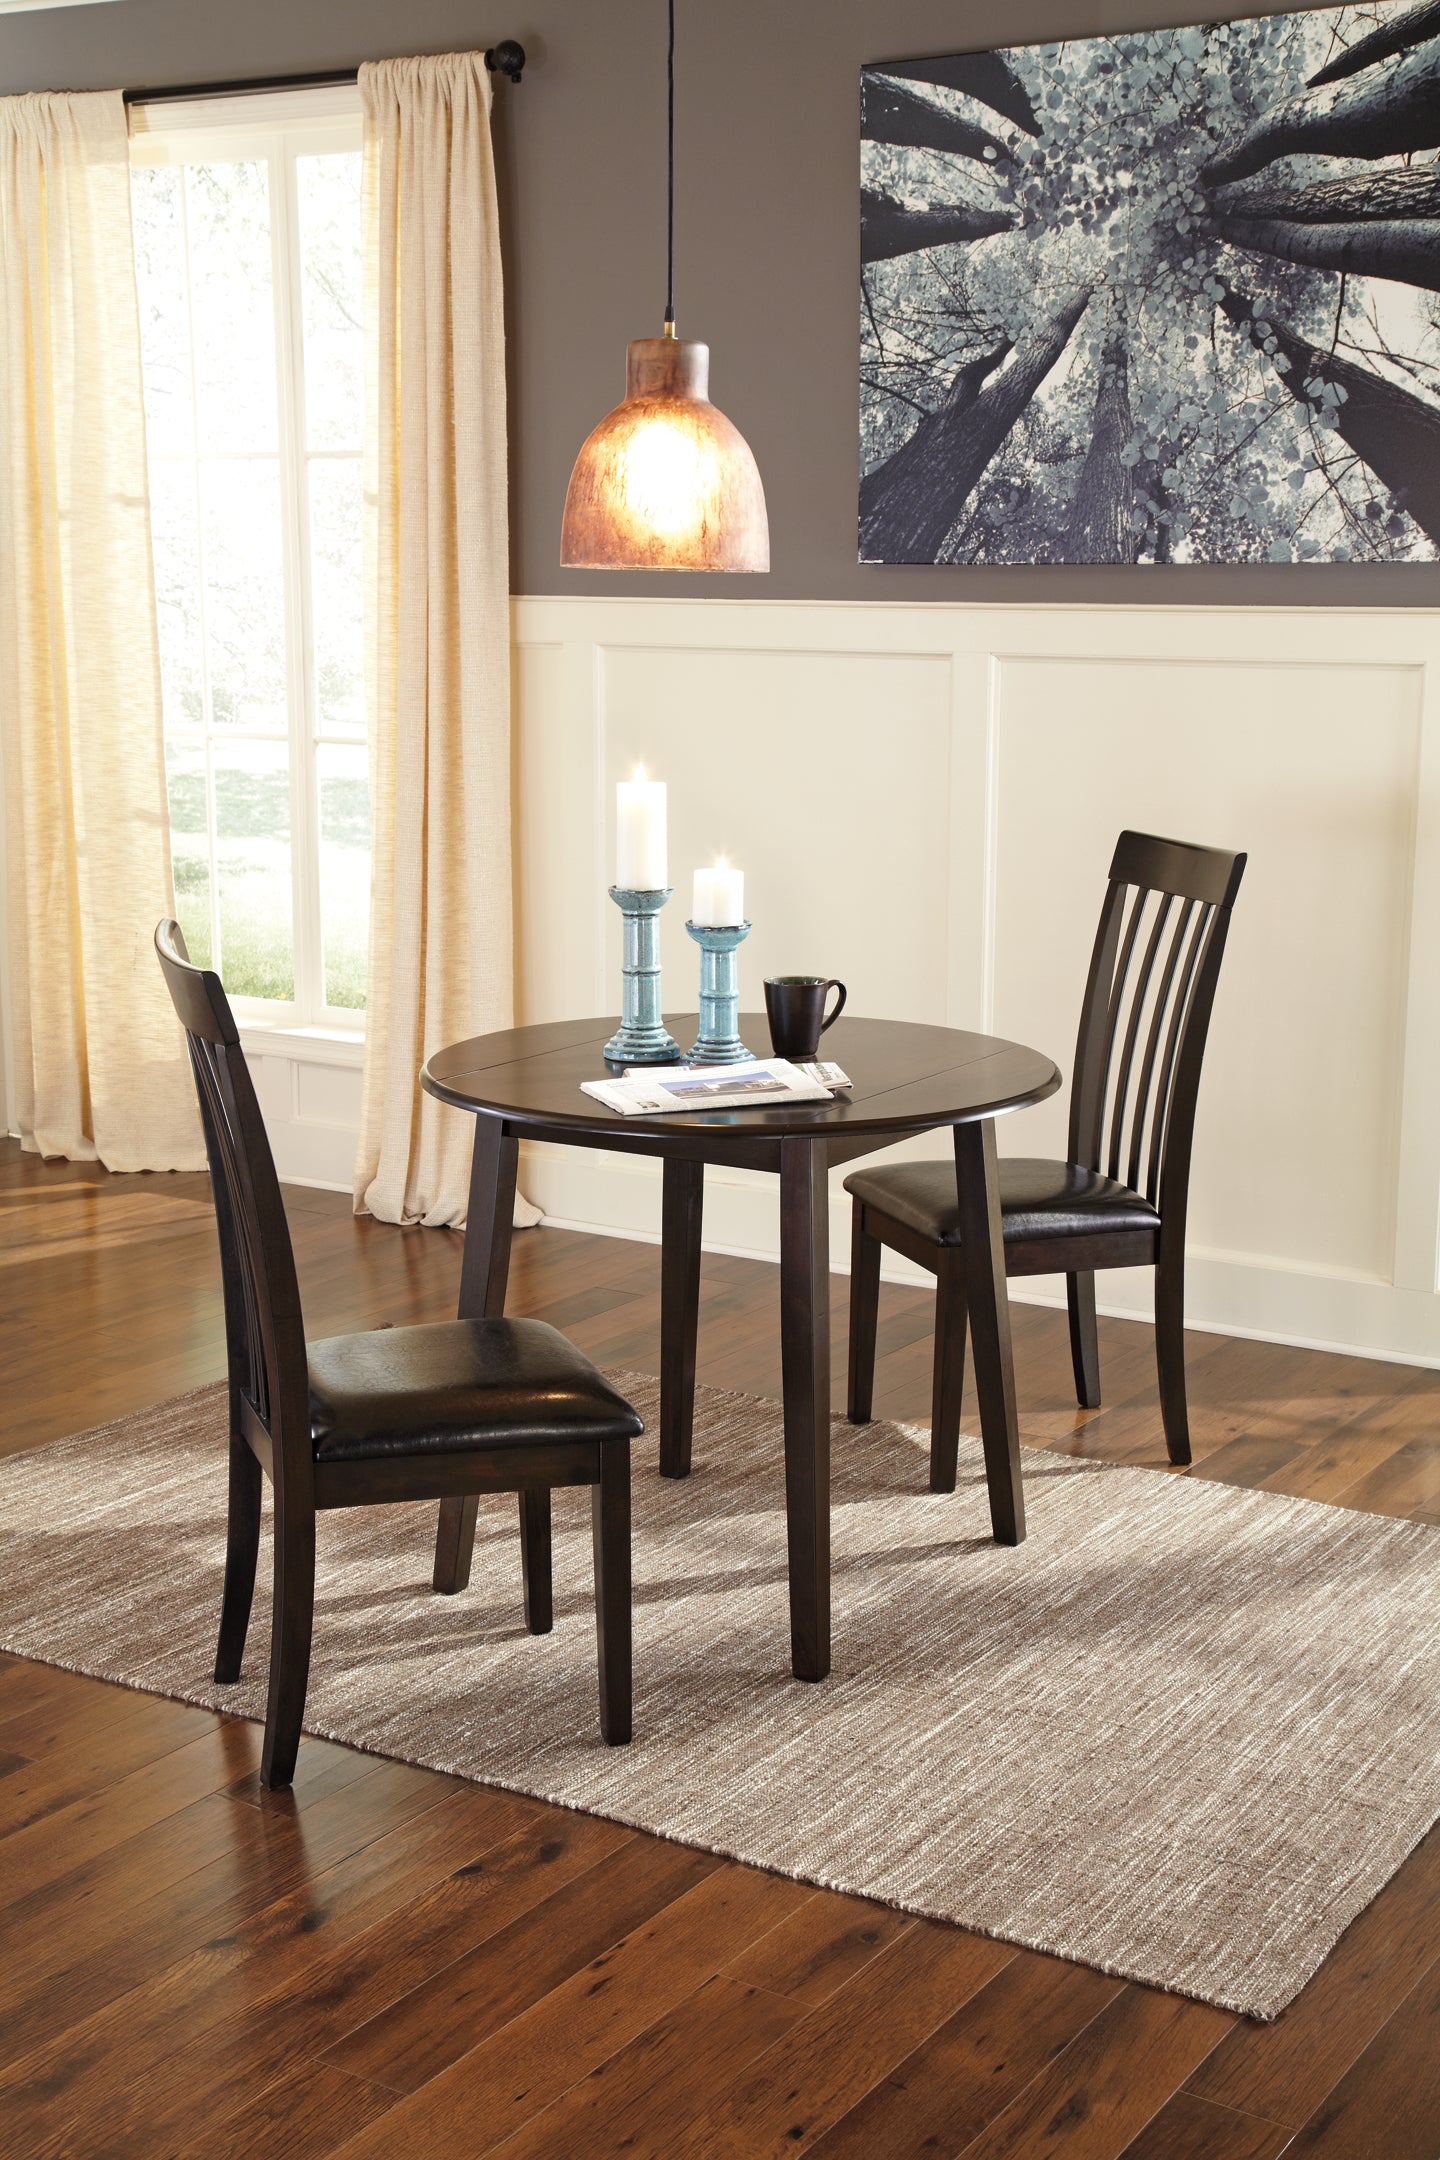 Ashley Express - Hammis Dining Table and 2 Chairs